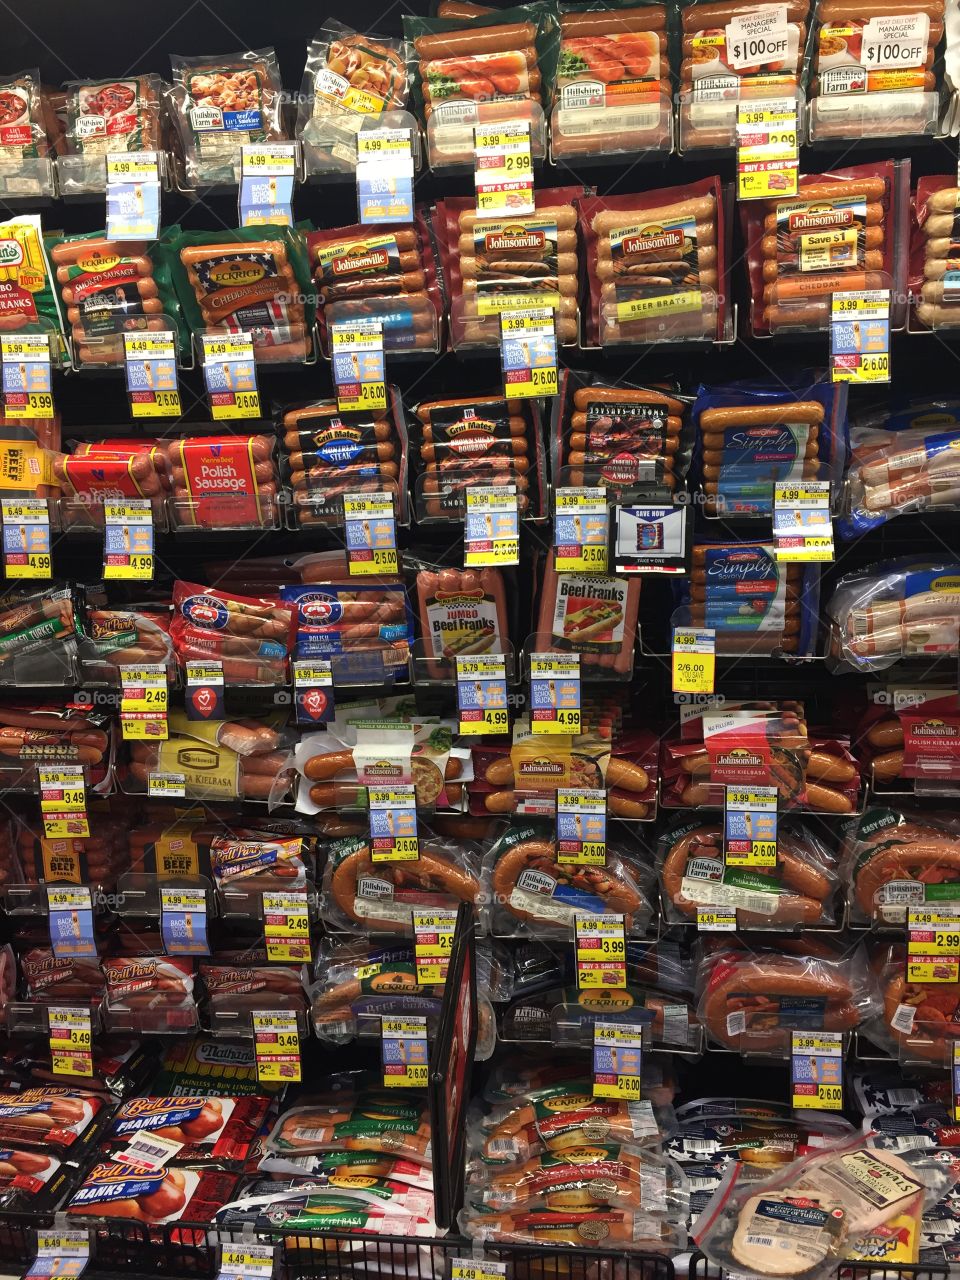 Hot dogs and sausage variety